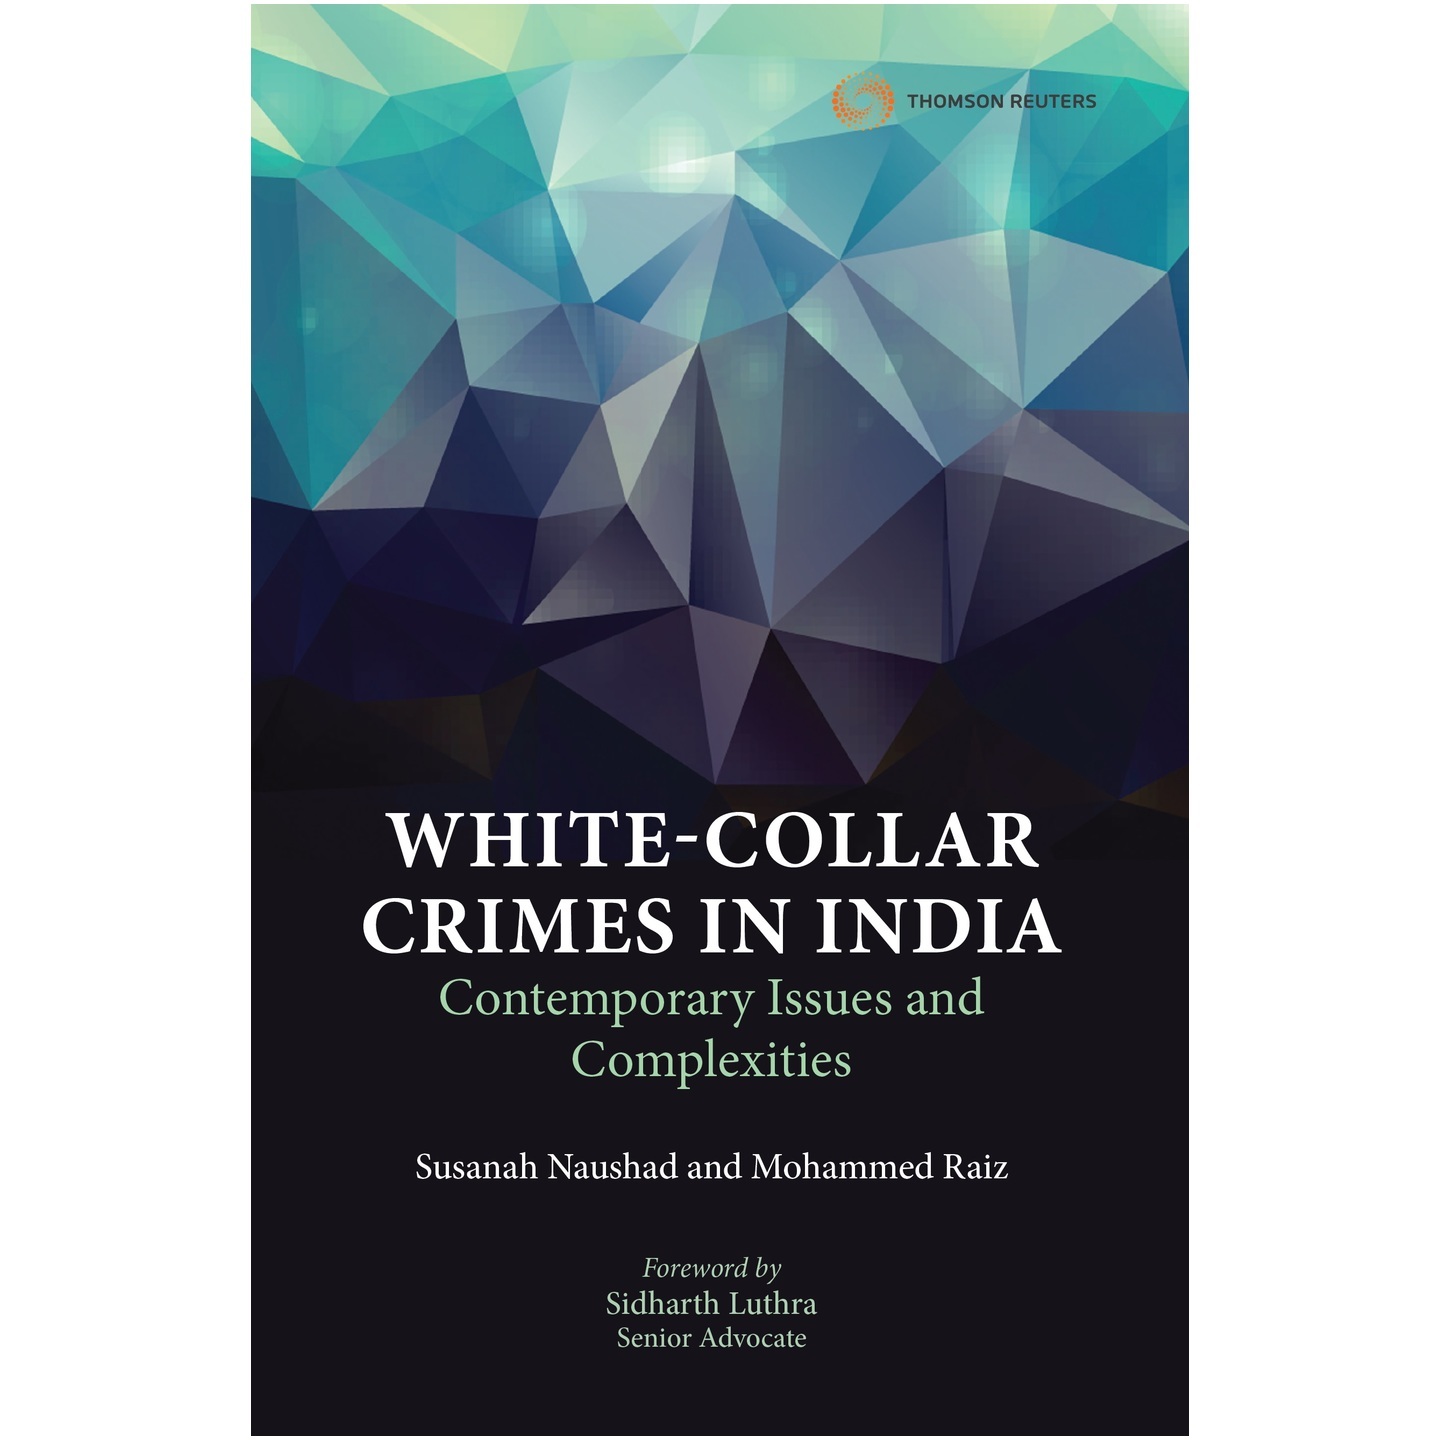 Book Review : White-Collar Crimes in India: Contemporary Issues and Complexities